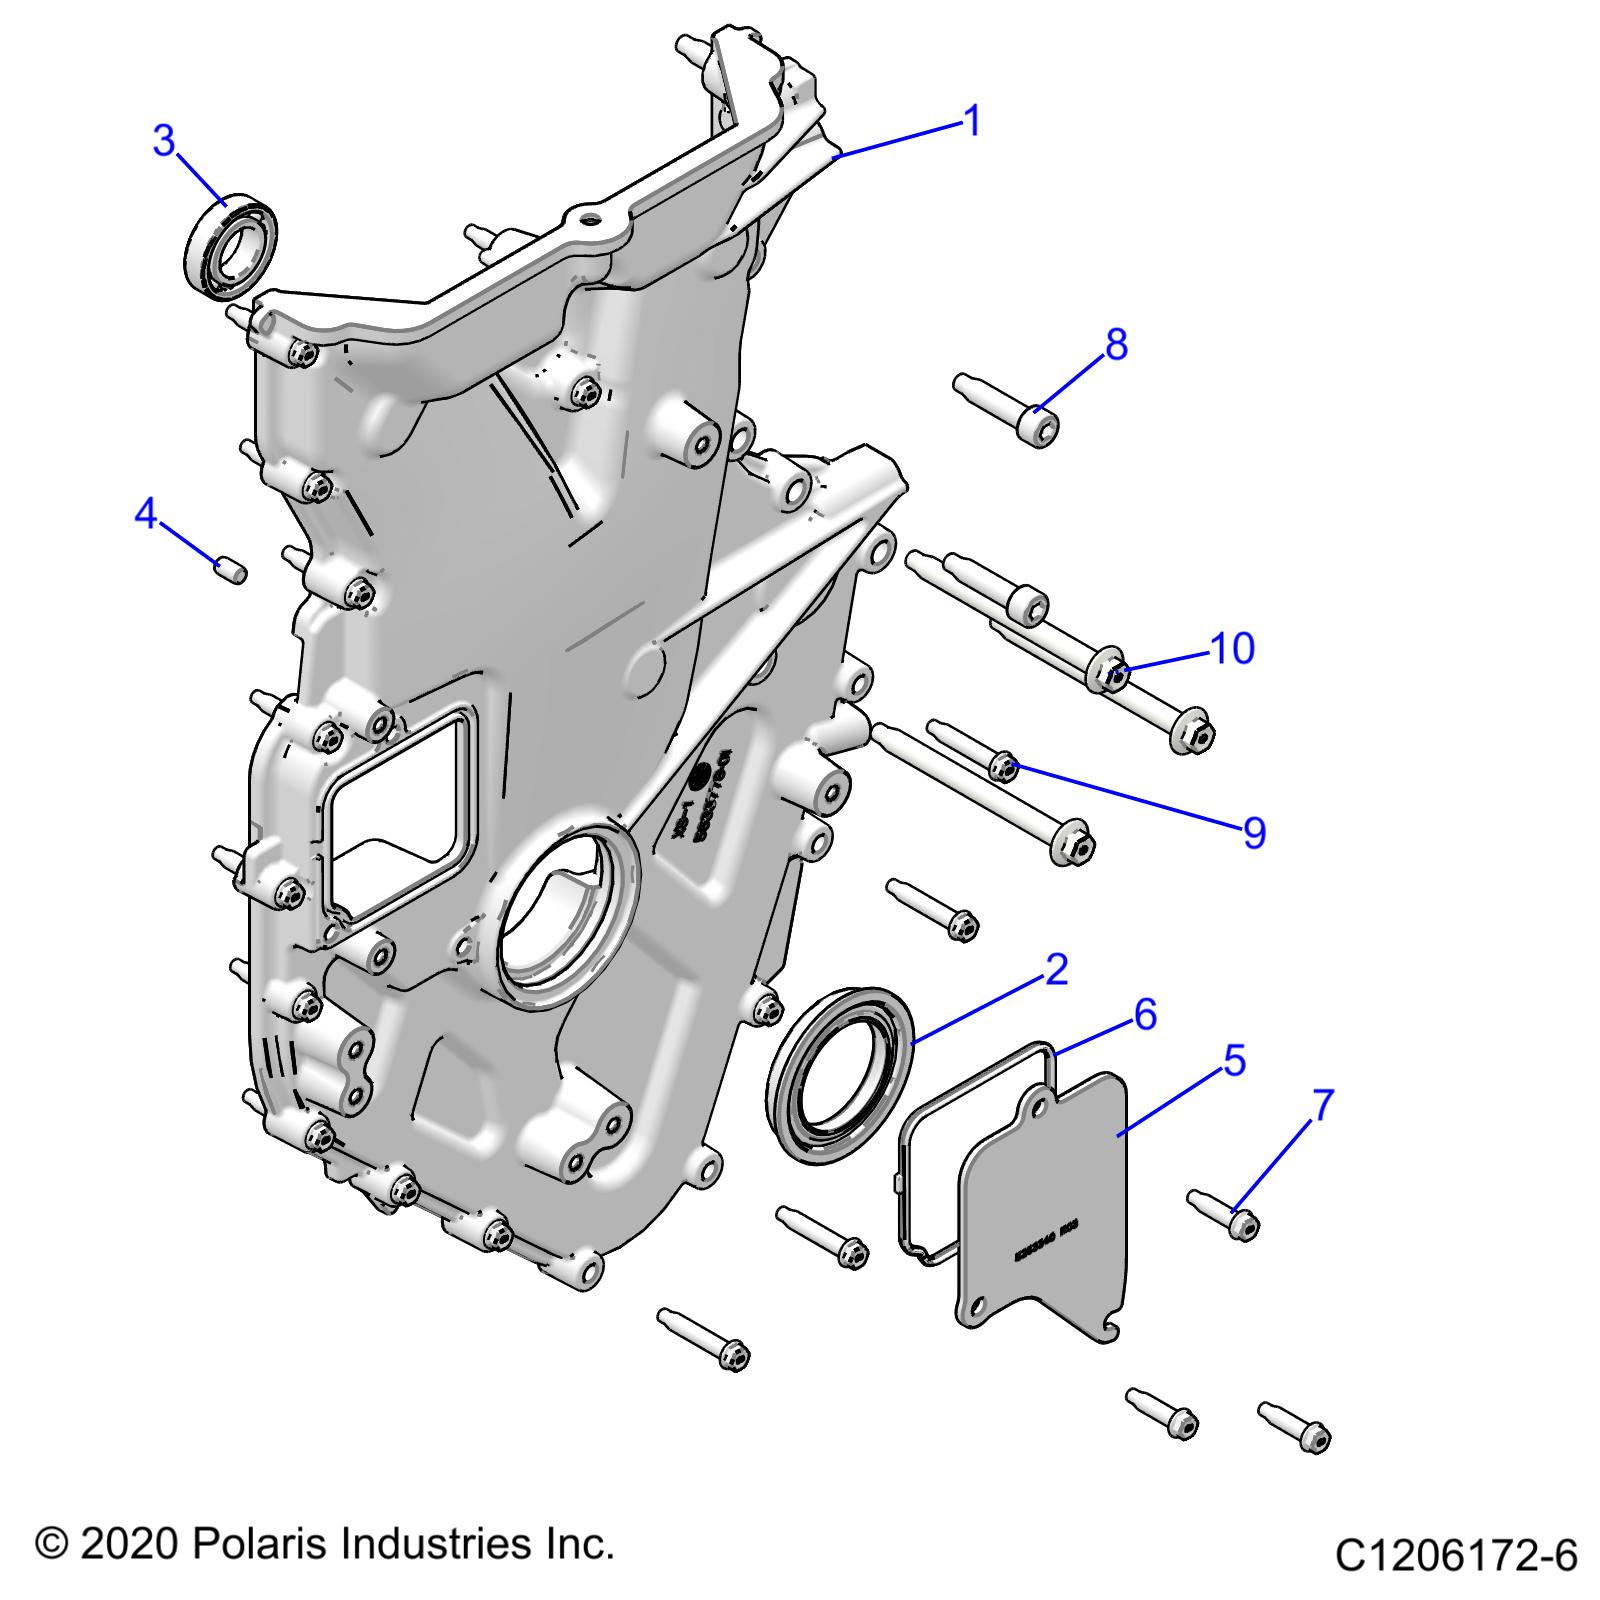 Part Number : 5814487 GASKET-TENS COVER